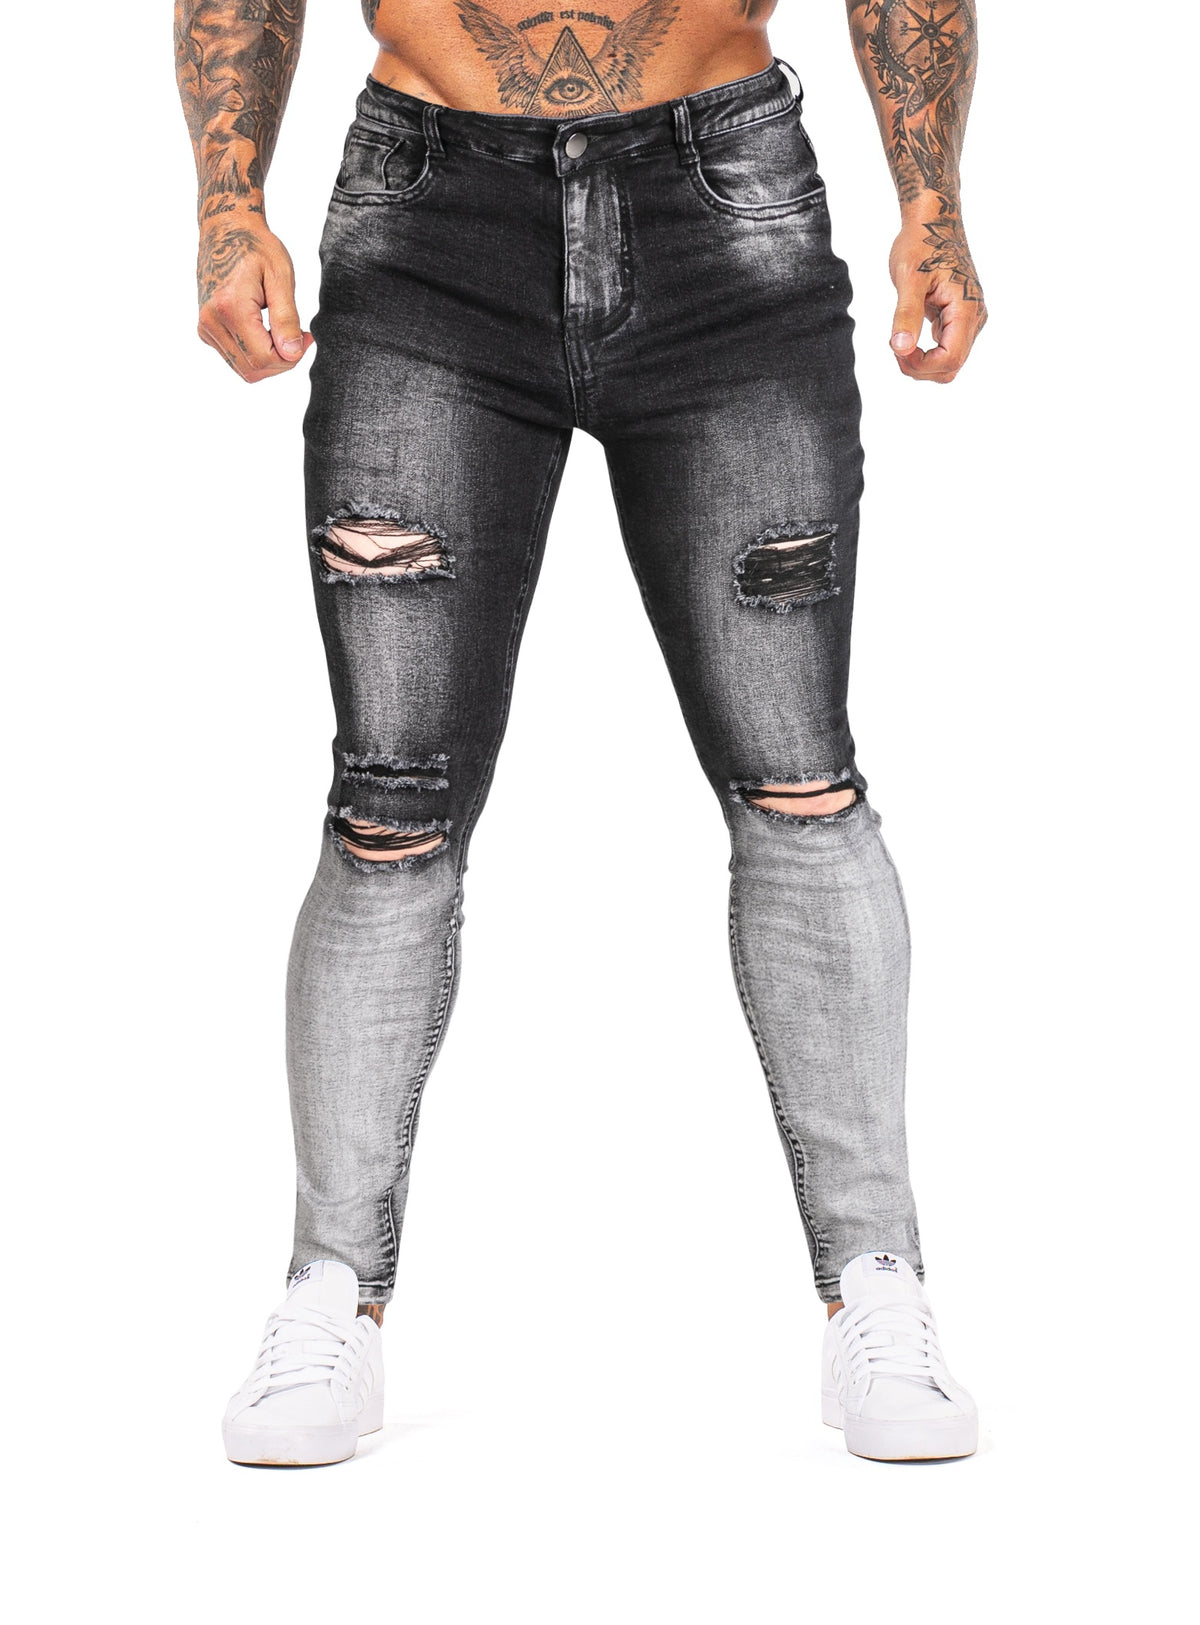 GINGTTO Men's Skinny Jeans Stretch Ripped Tapered Leg